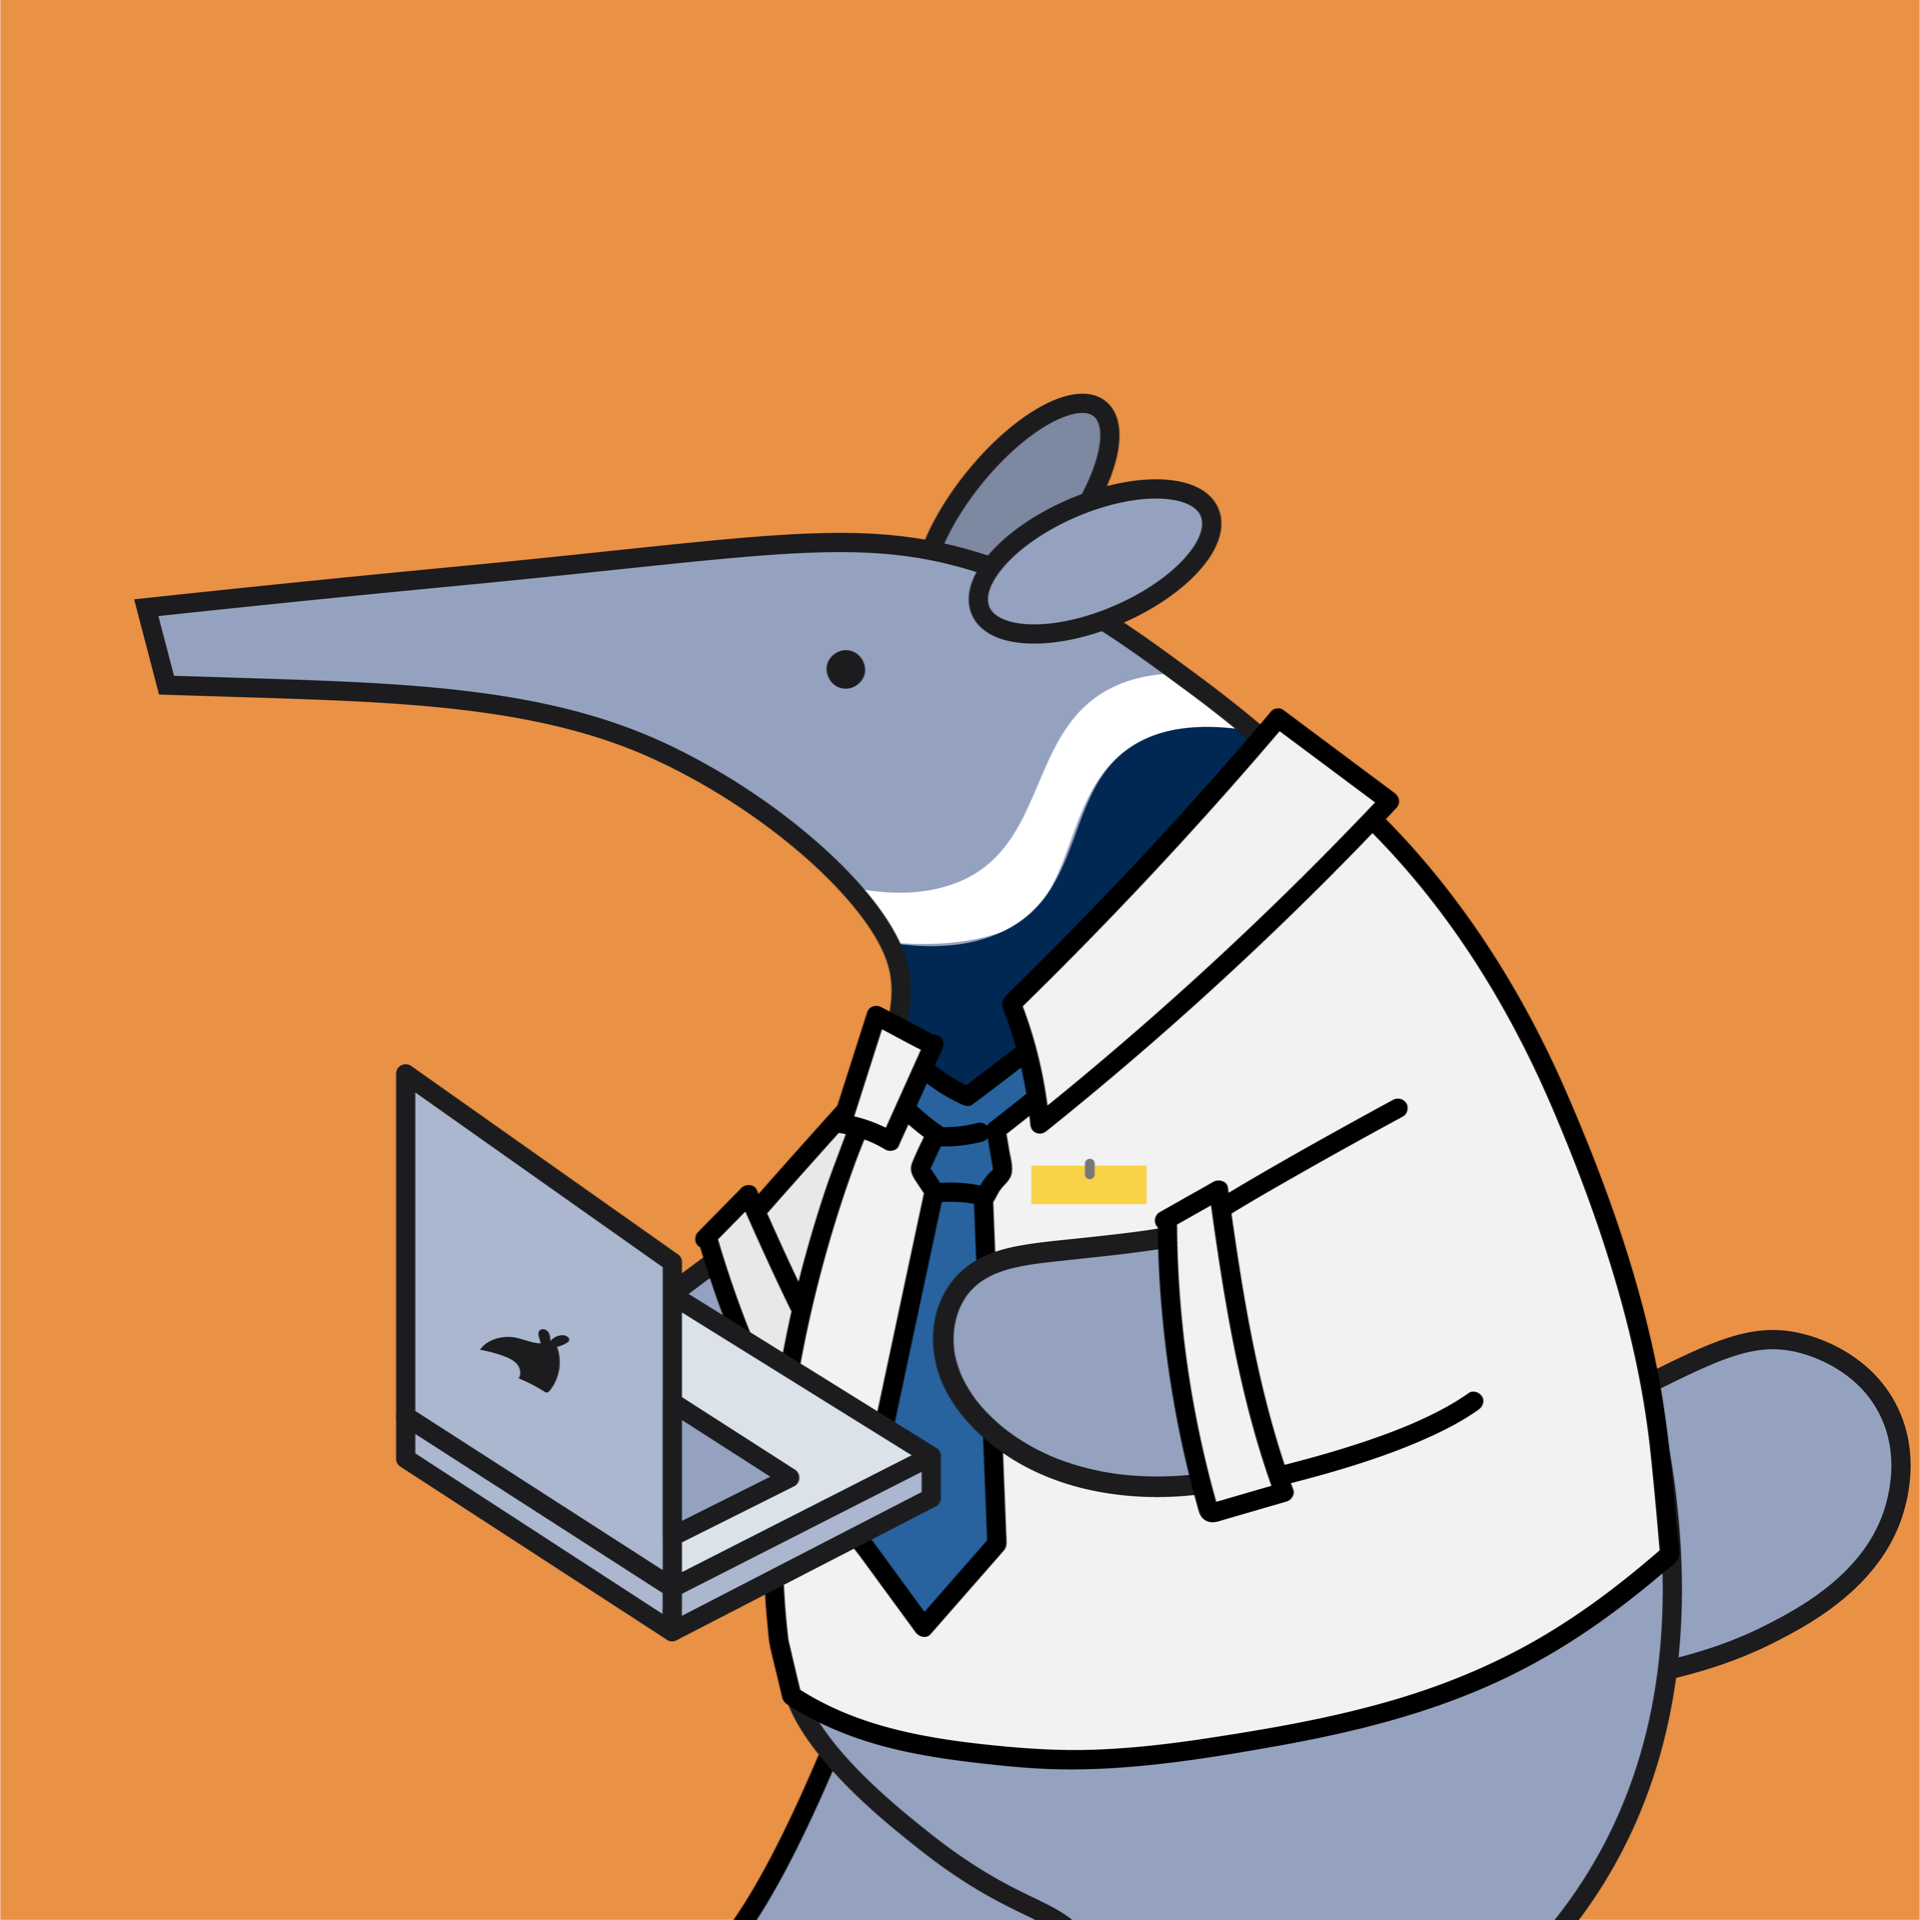 Staff Anteater wearing a tie and carrying a laptop